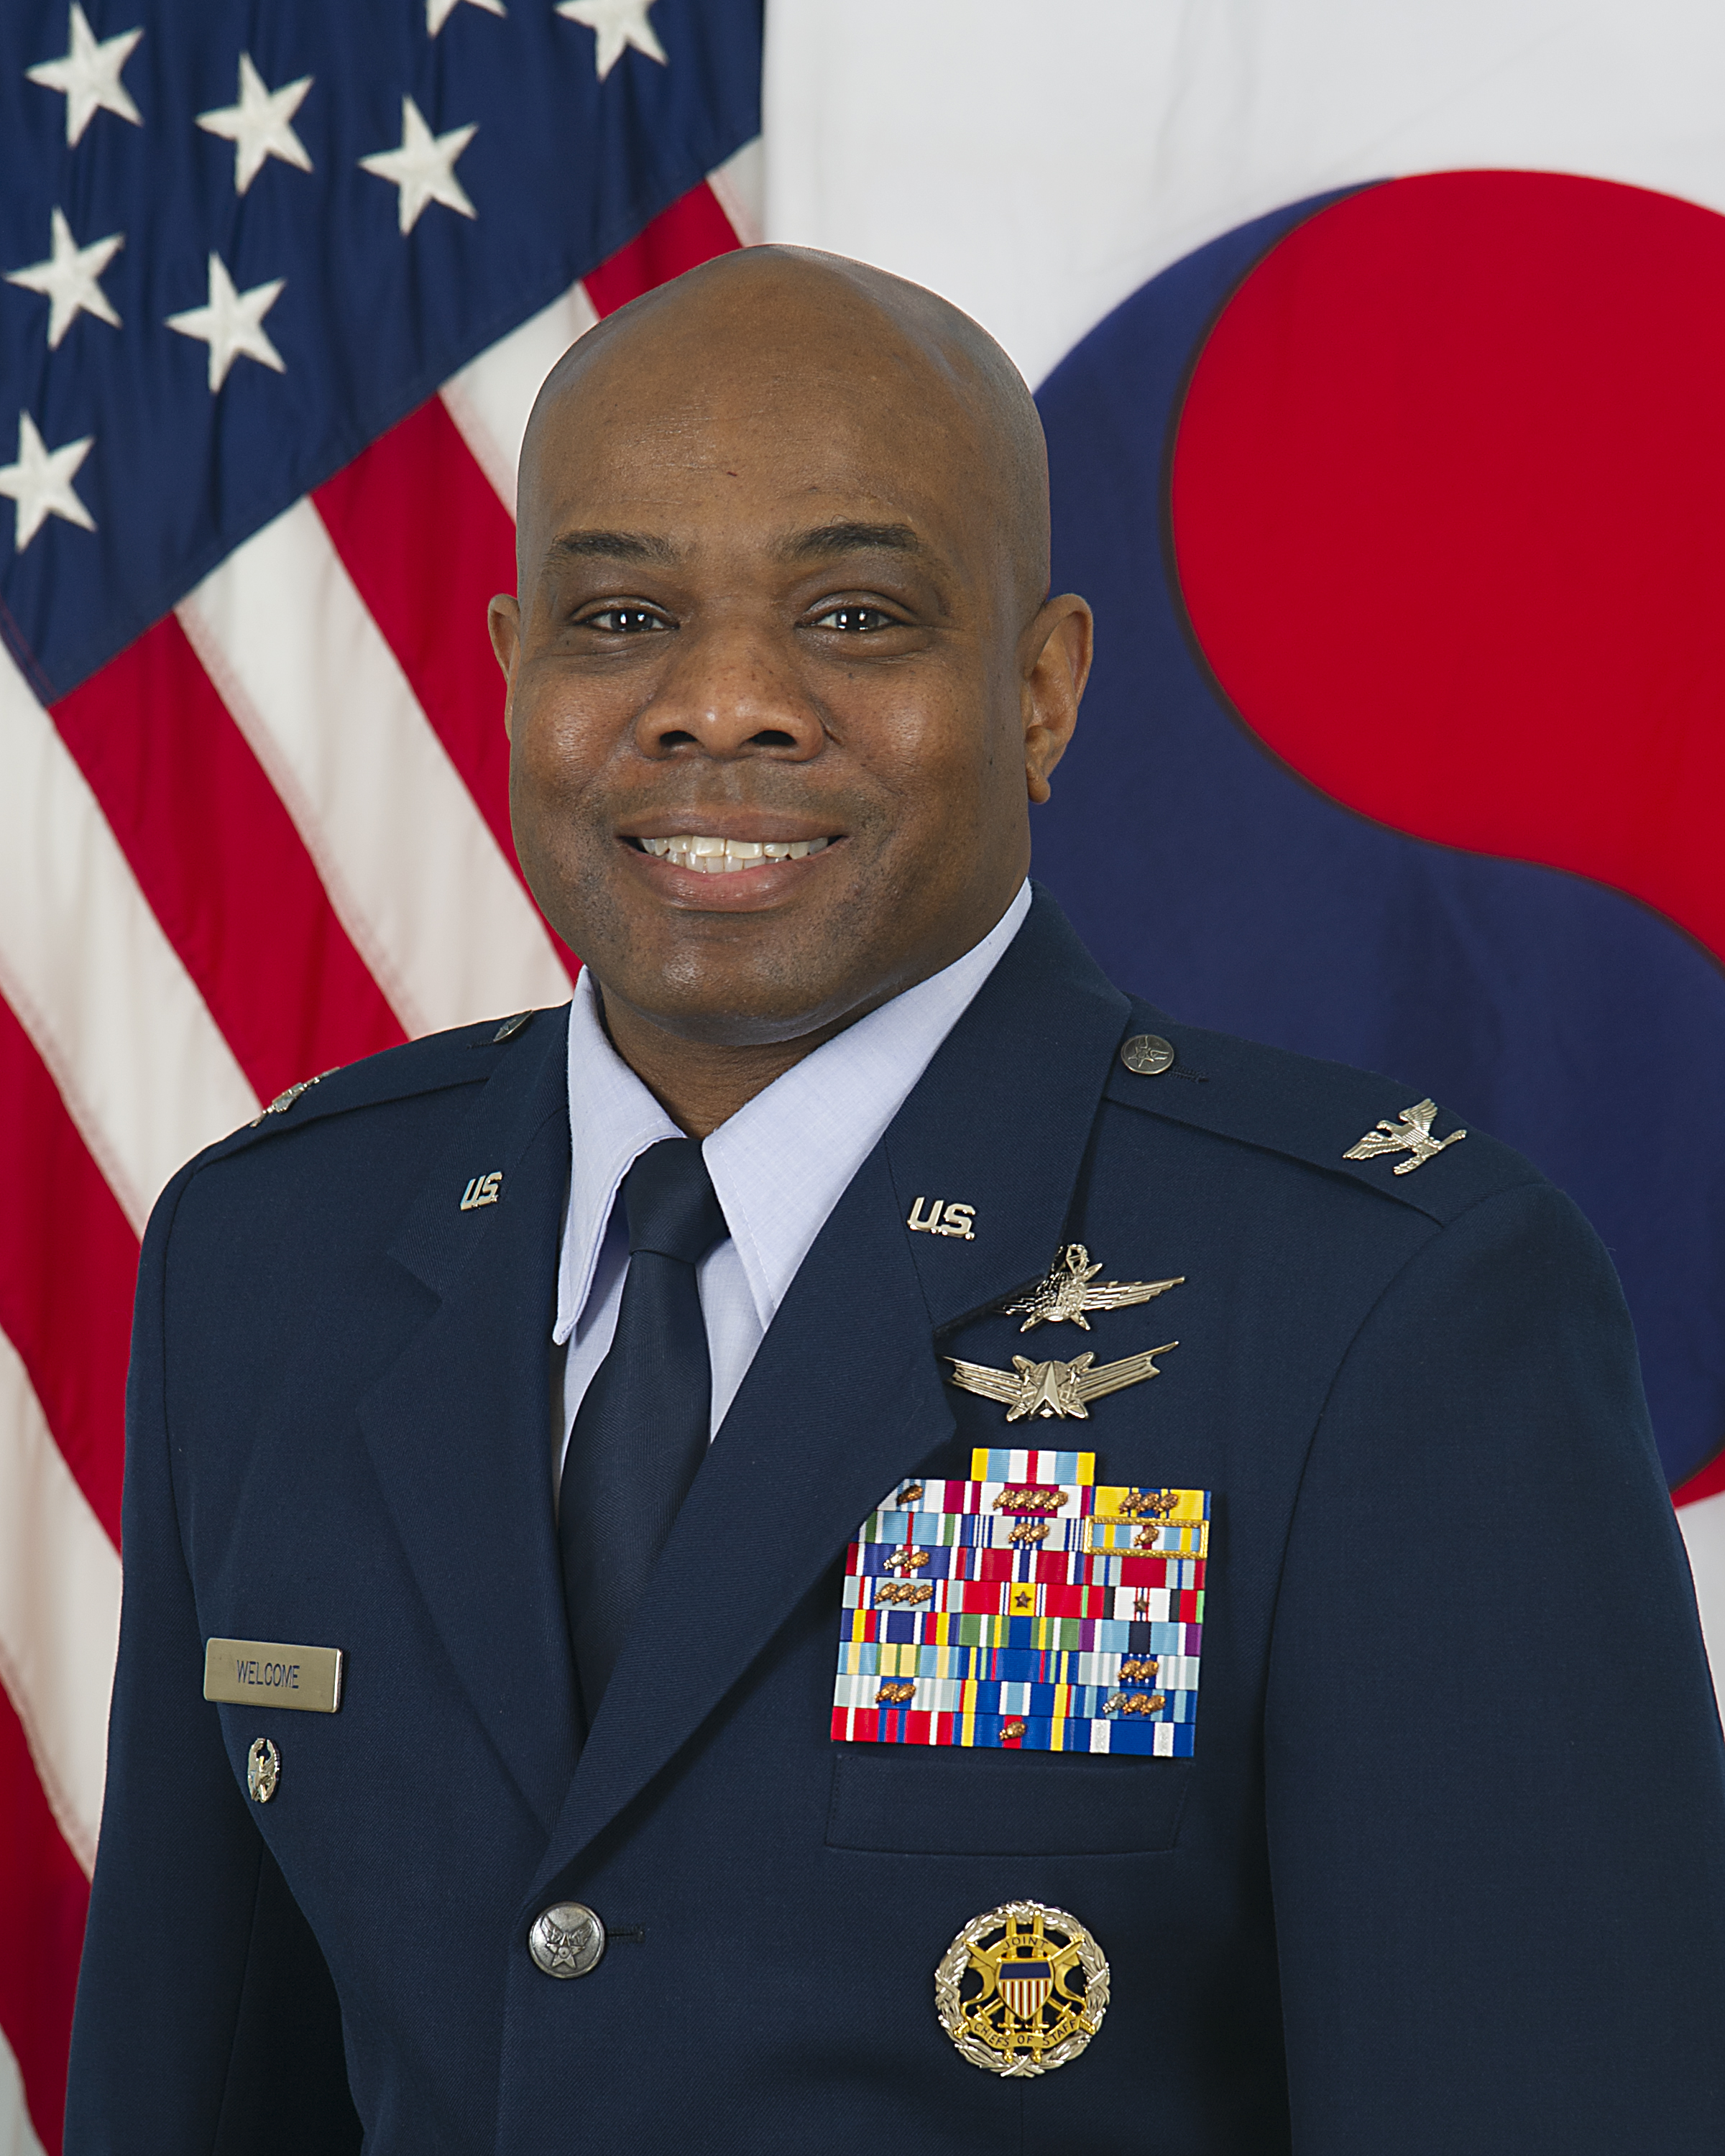 USFK Assistant Chief of Staff J6 - Colonel Erick O. Welcome